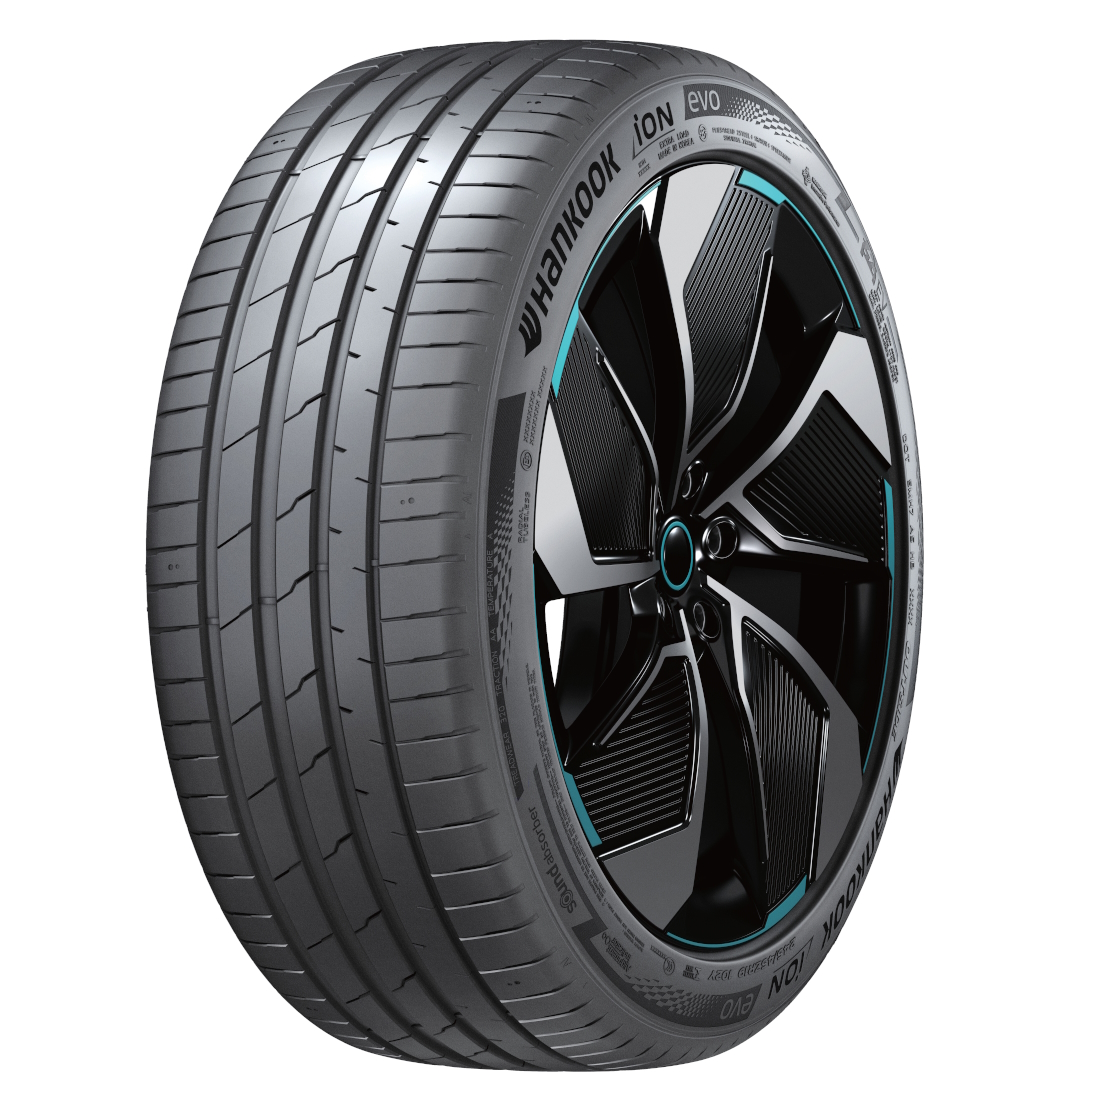 hankook, hankook tire malaysia, malaysia, hankook tire malaysia introduces ion evo and ventus prime 4 tyres